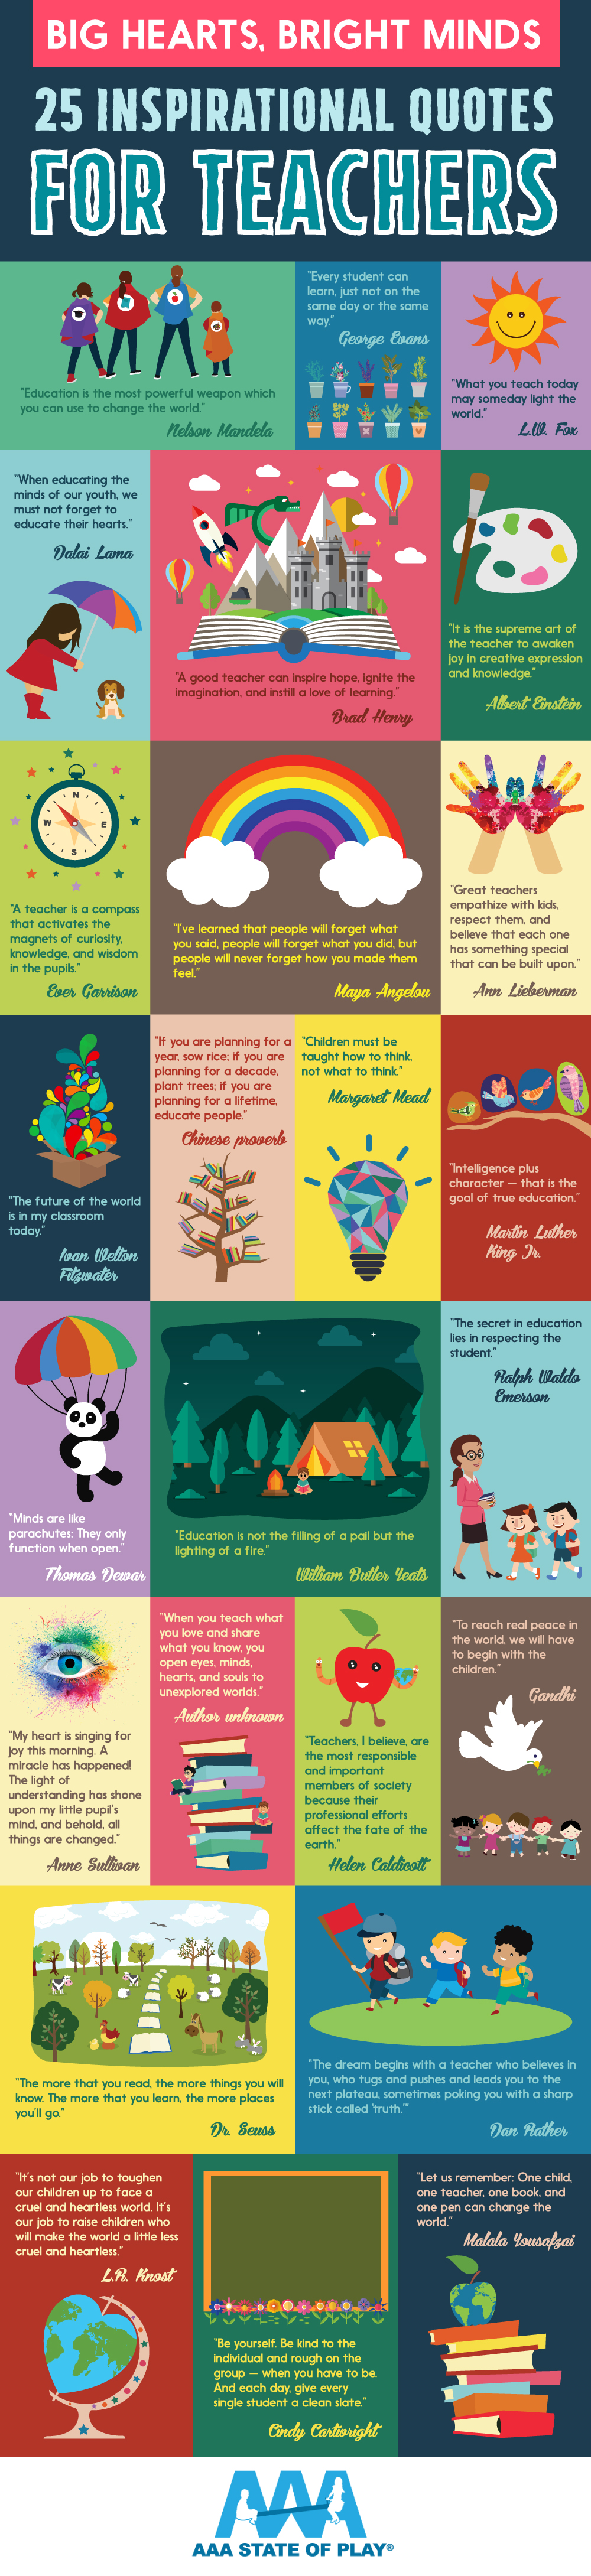 25 Inspirational Quotes for Teachers (Infographic)